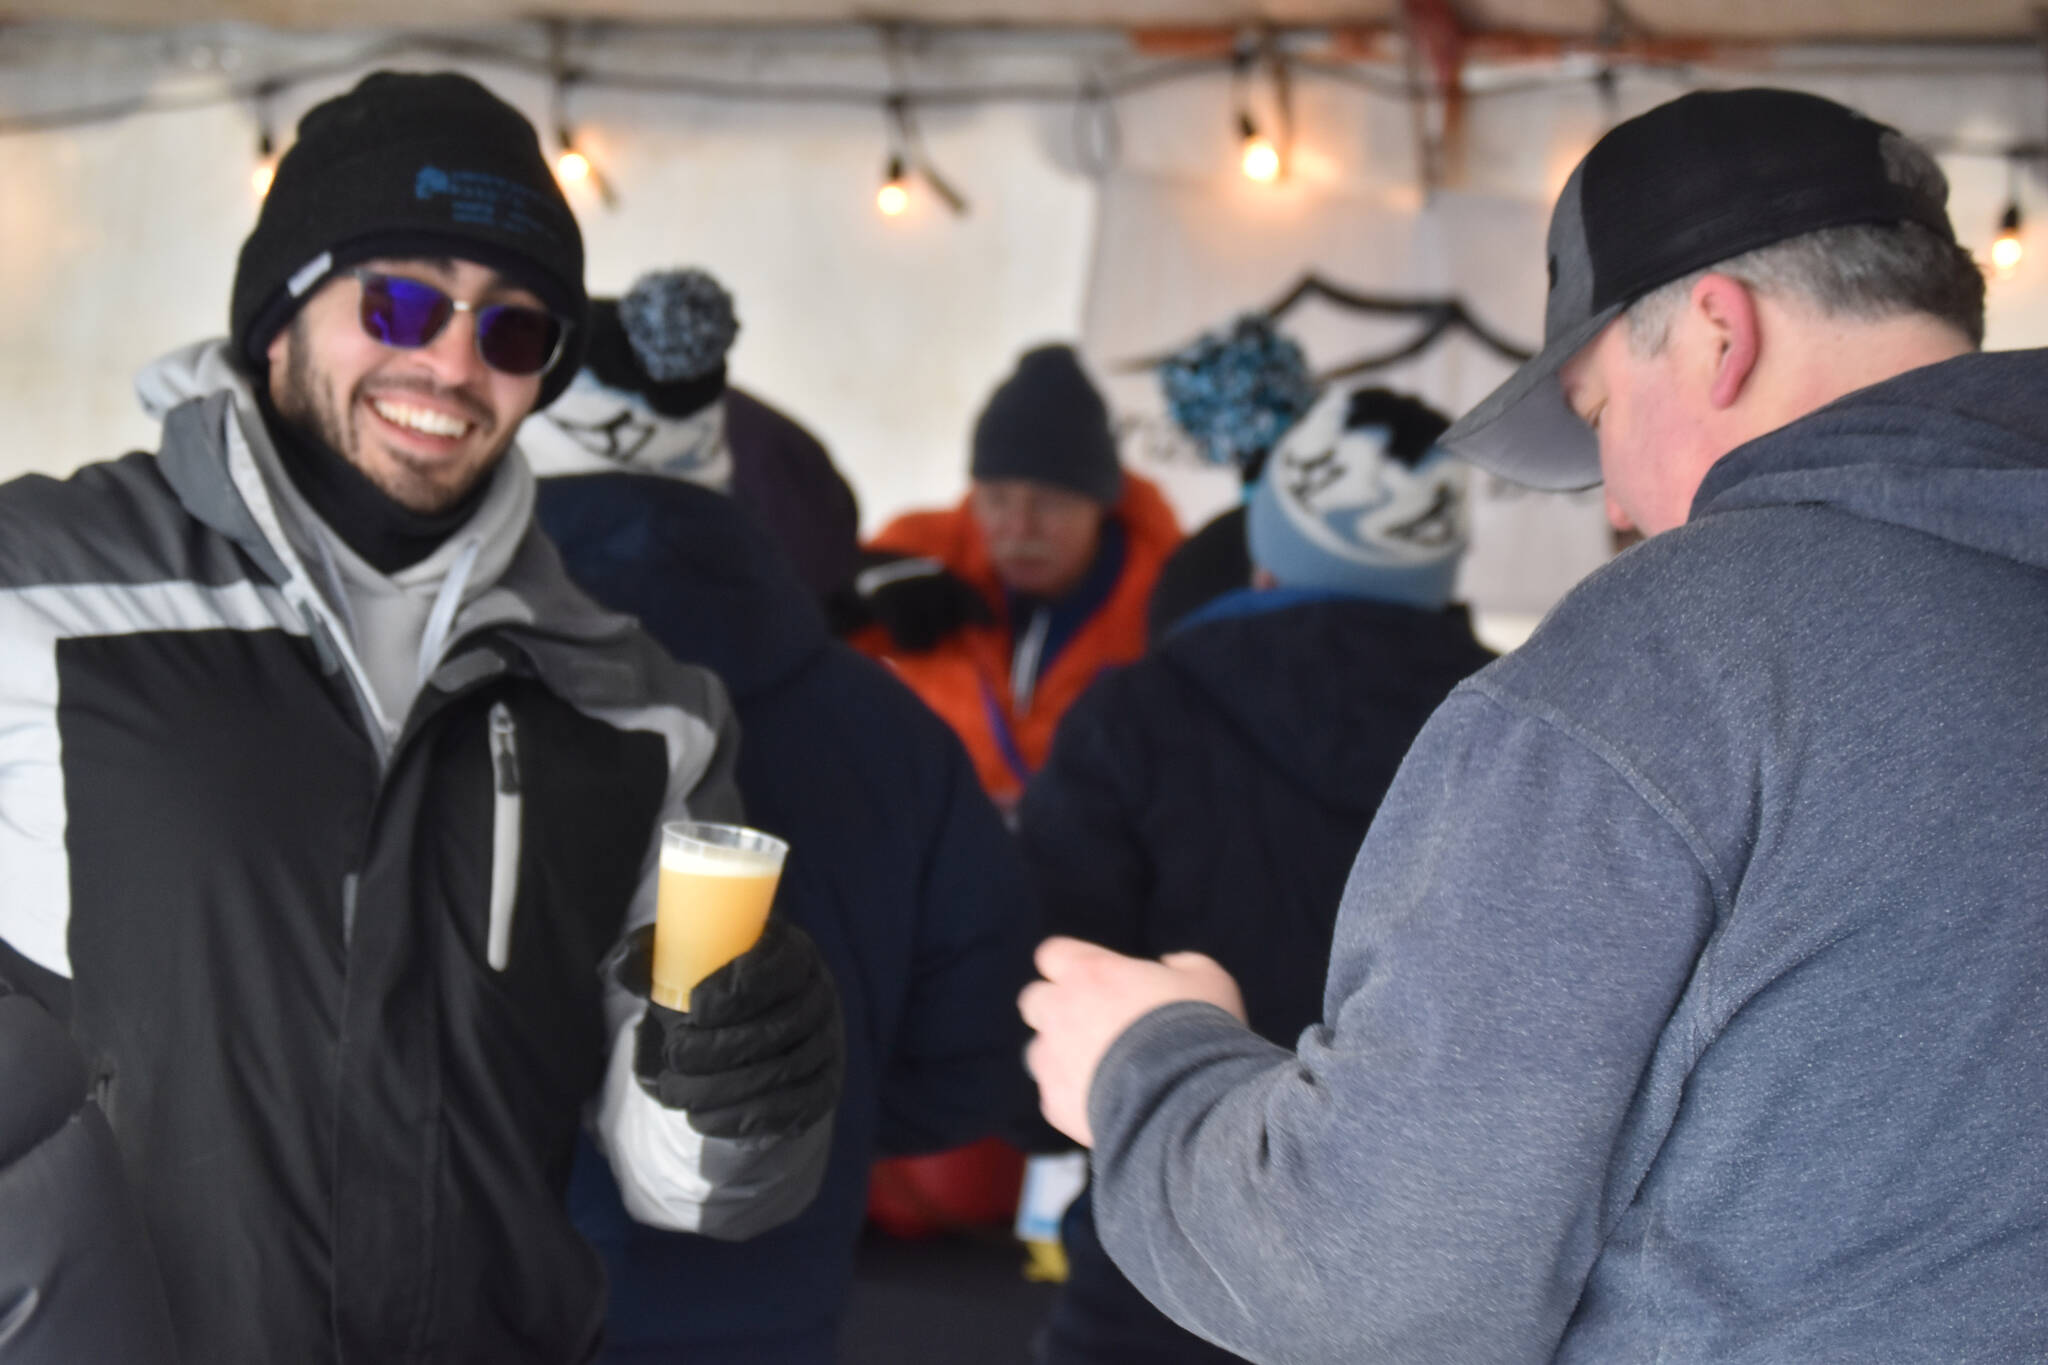 An attendee gets a drink from HooDoo Brewing Company during Frozen RiverFest on Saturday, Feb. 18, 2023 at Soldotna Creek Park in Soldotna, Alaska. (Jake Dye/Peninsula Clarion)